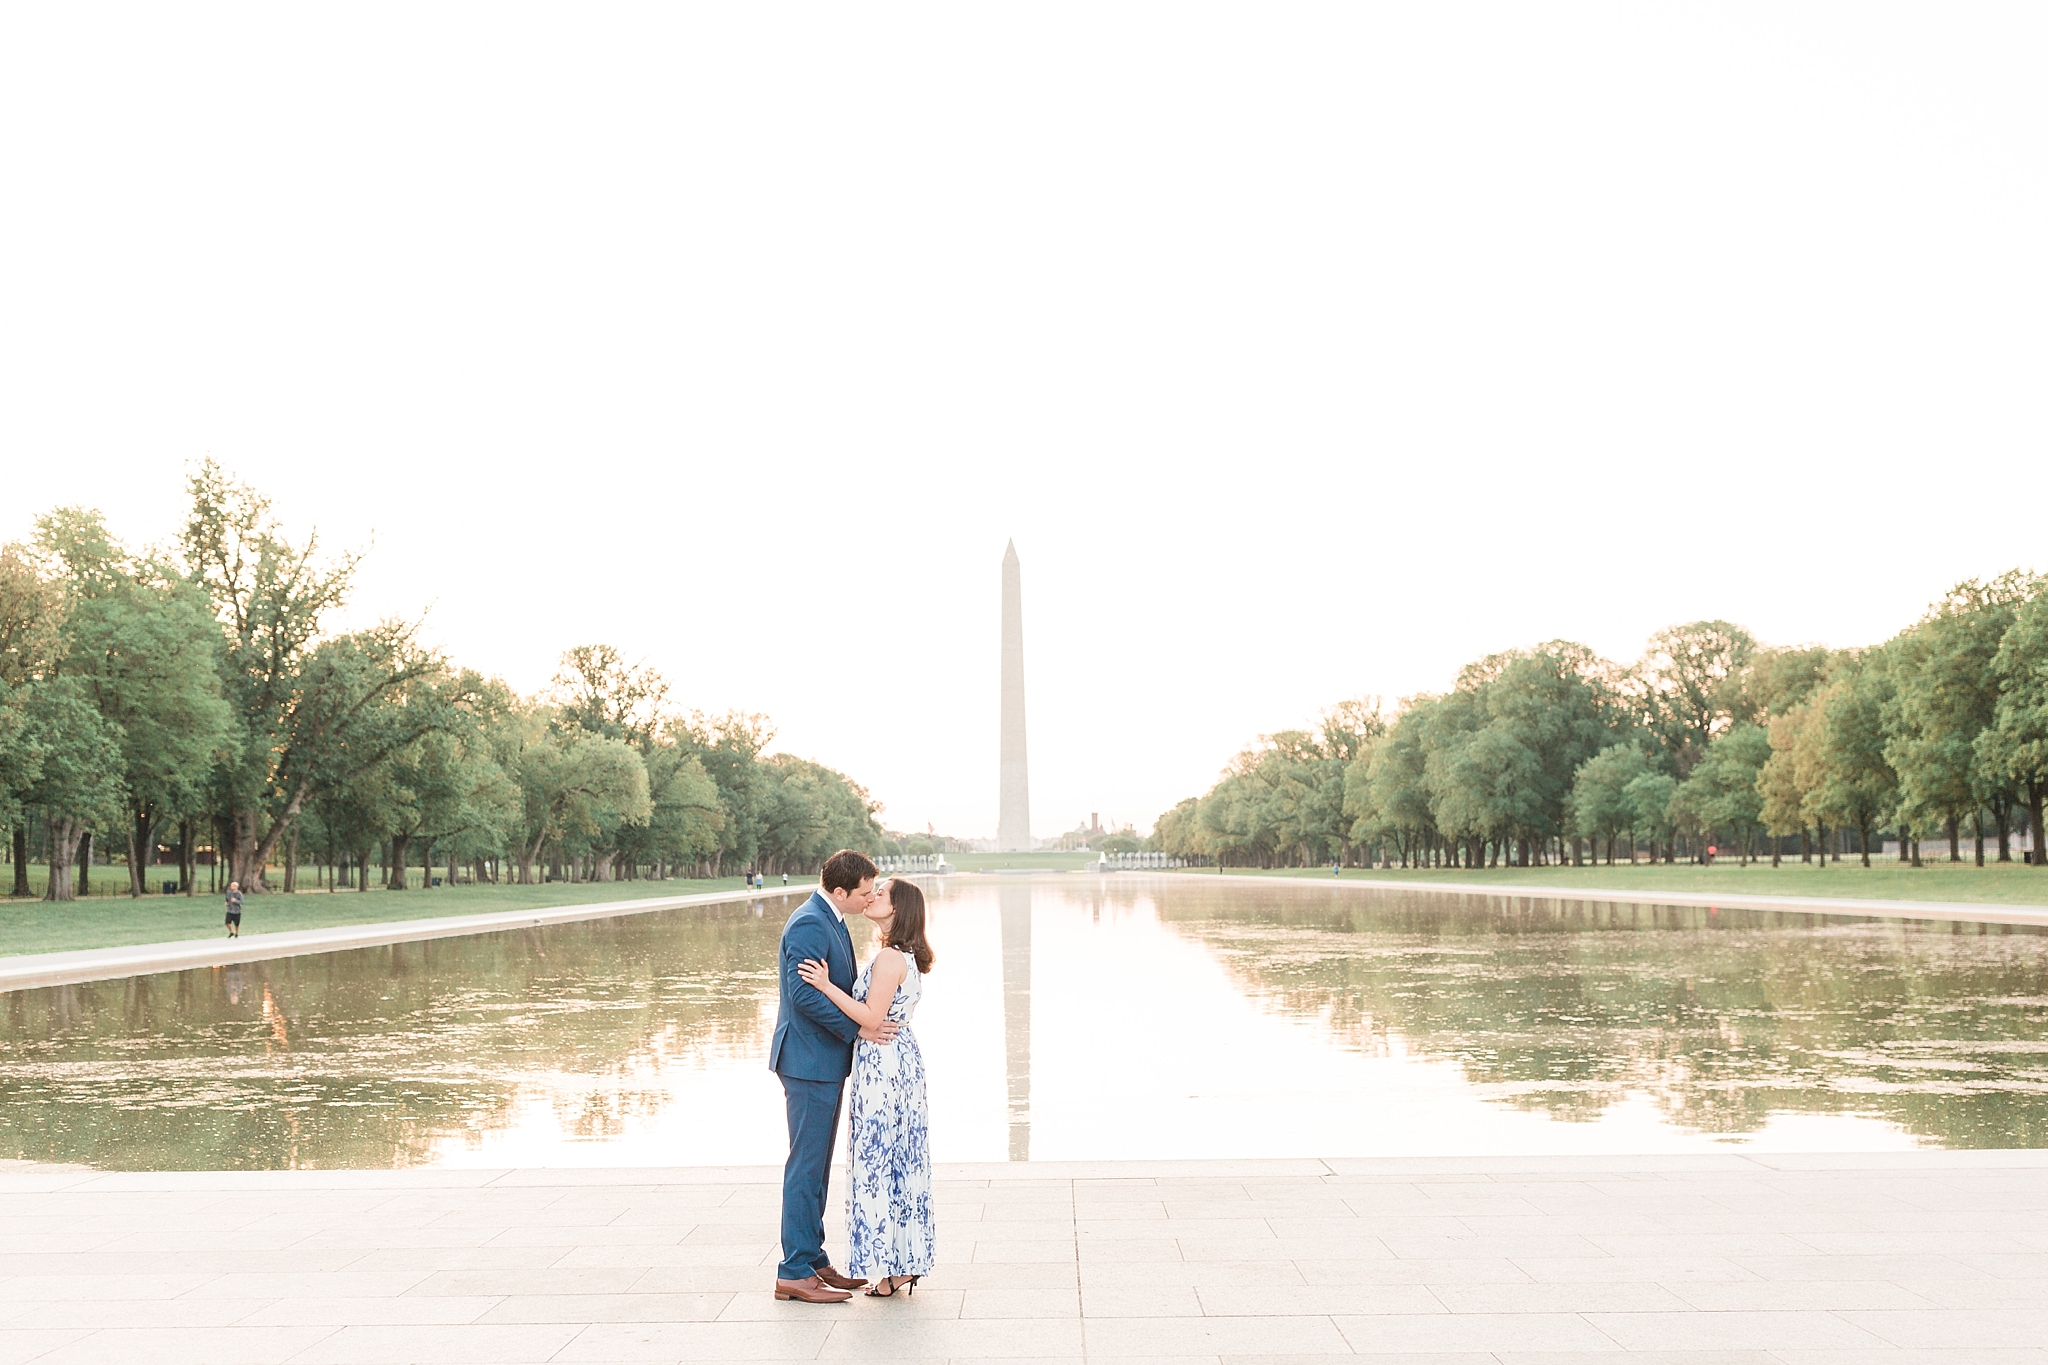 This romantic spring engagement session captures some of the most iconic highlights of Washington, DC including the Lincoln Memorial, Constitution Gardens, and DC War Memorial.